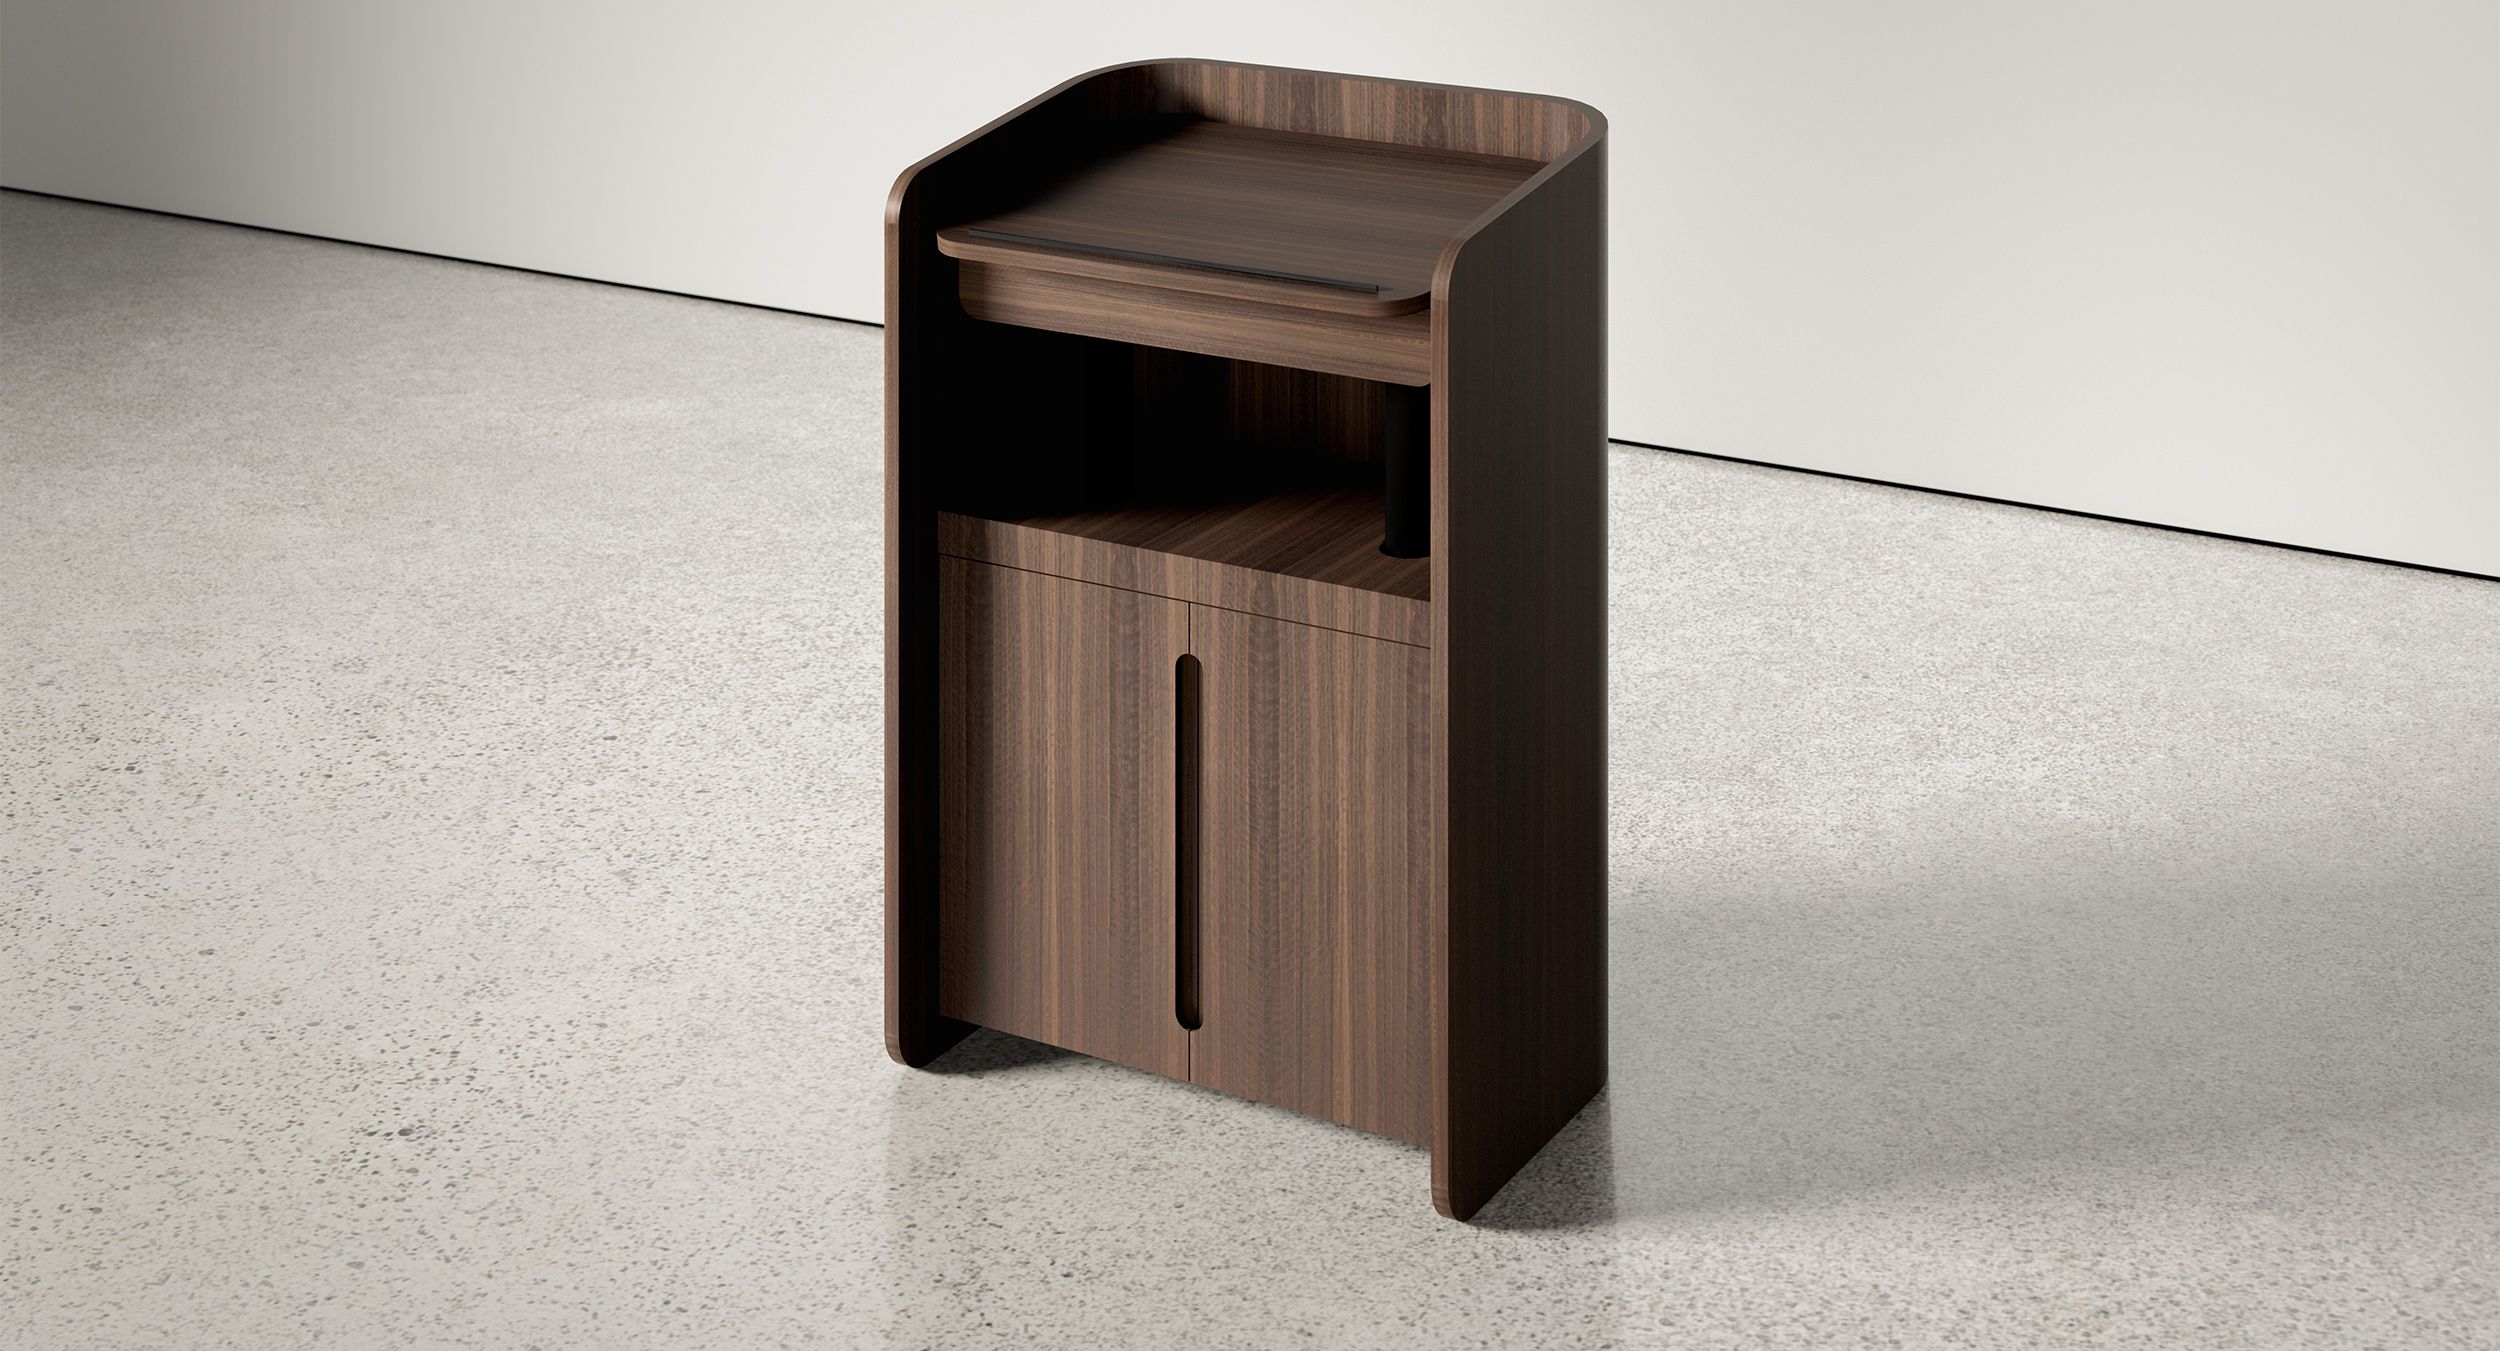 The Crew adjustable-height mobile lectern is both functional and beautiful.